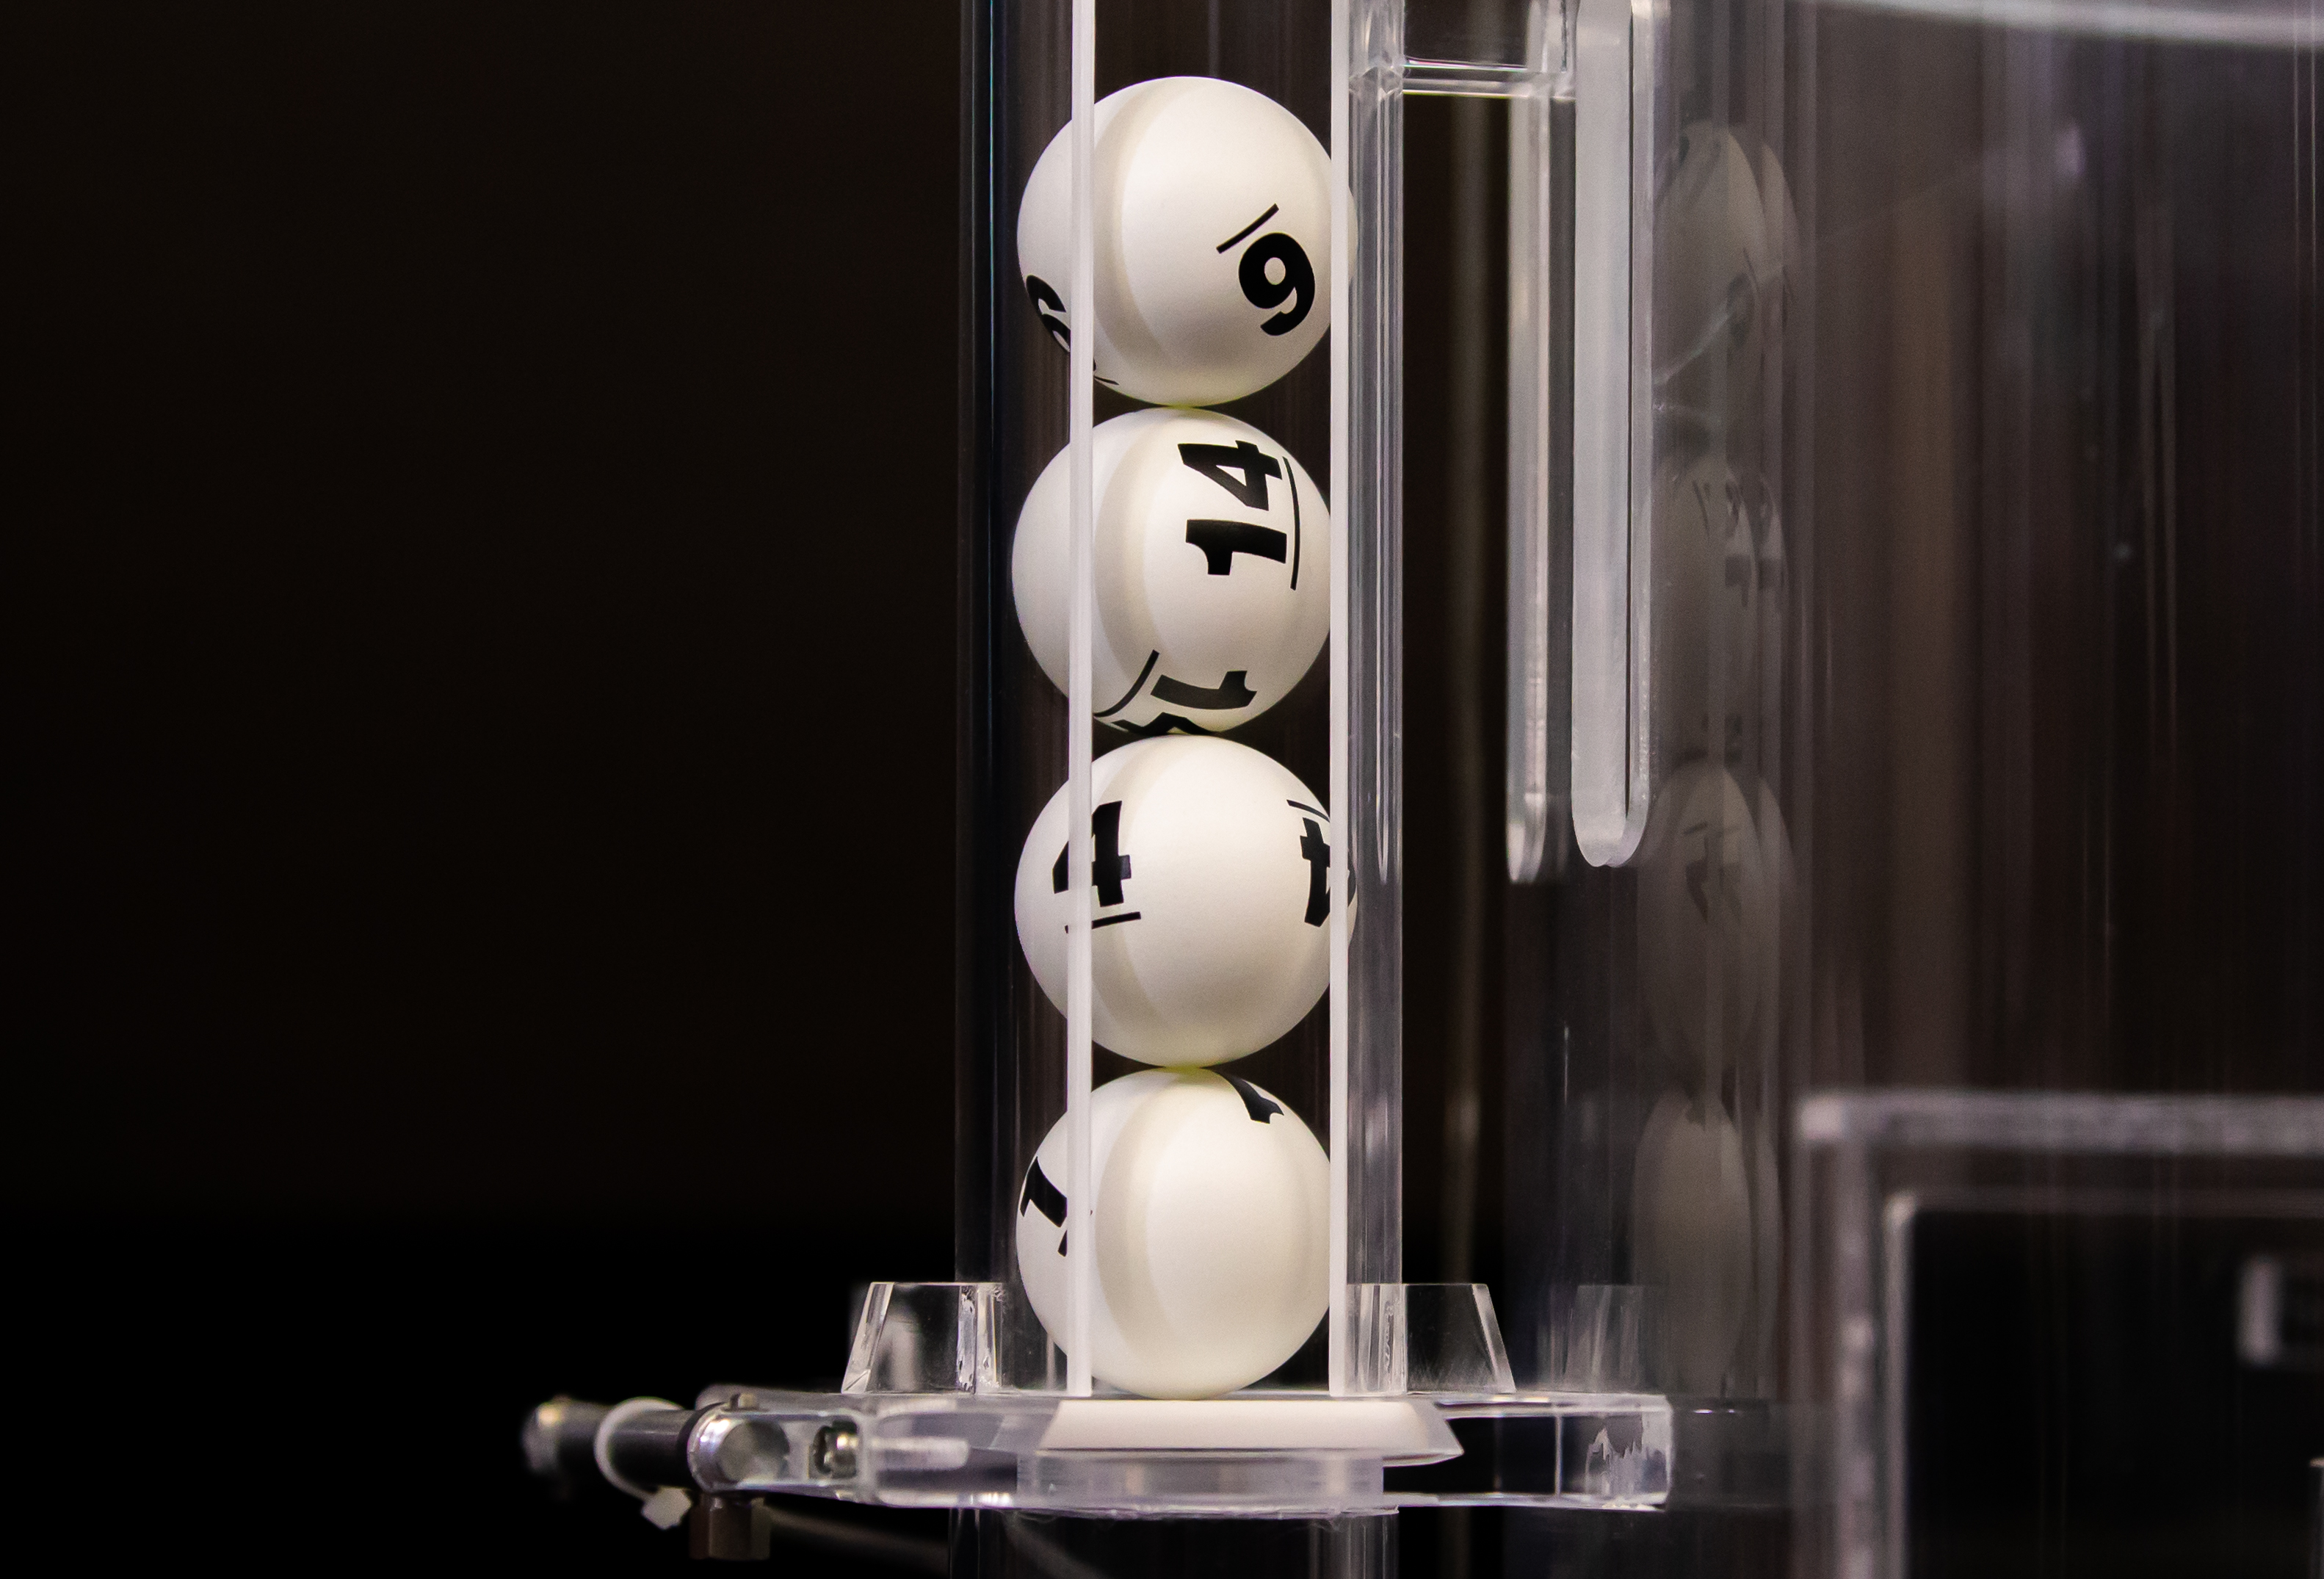 lotto sat 24 august 2019